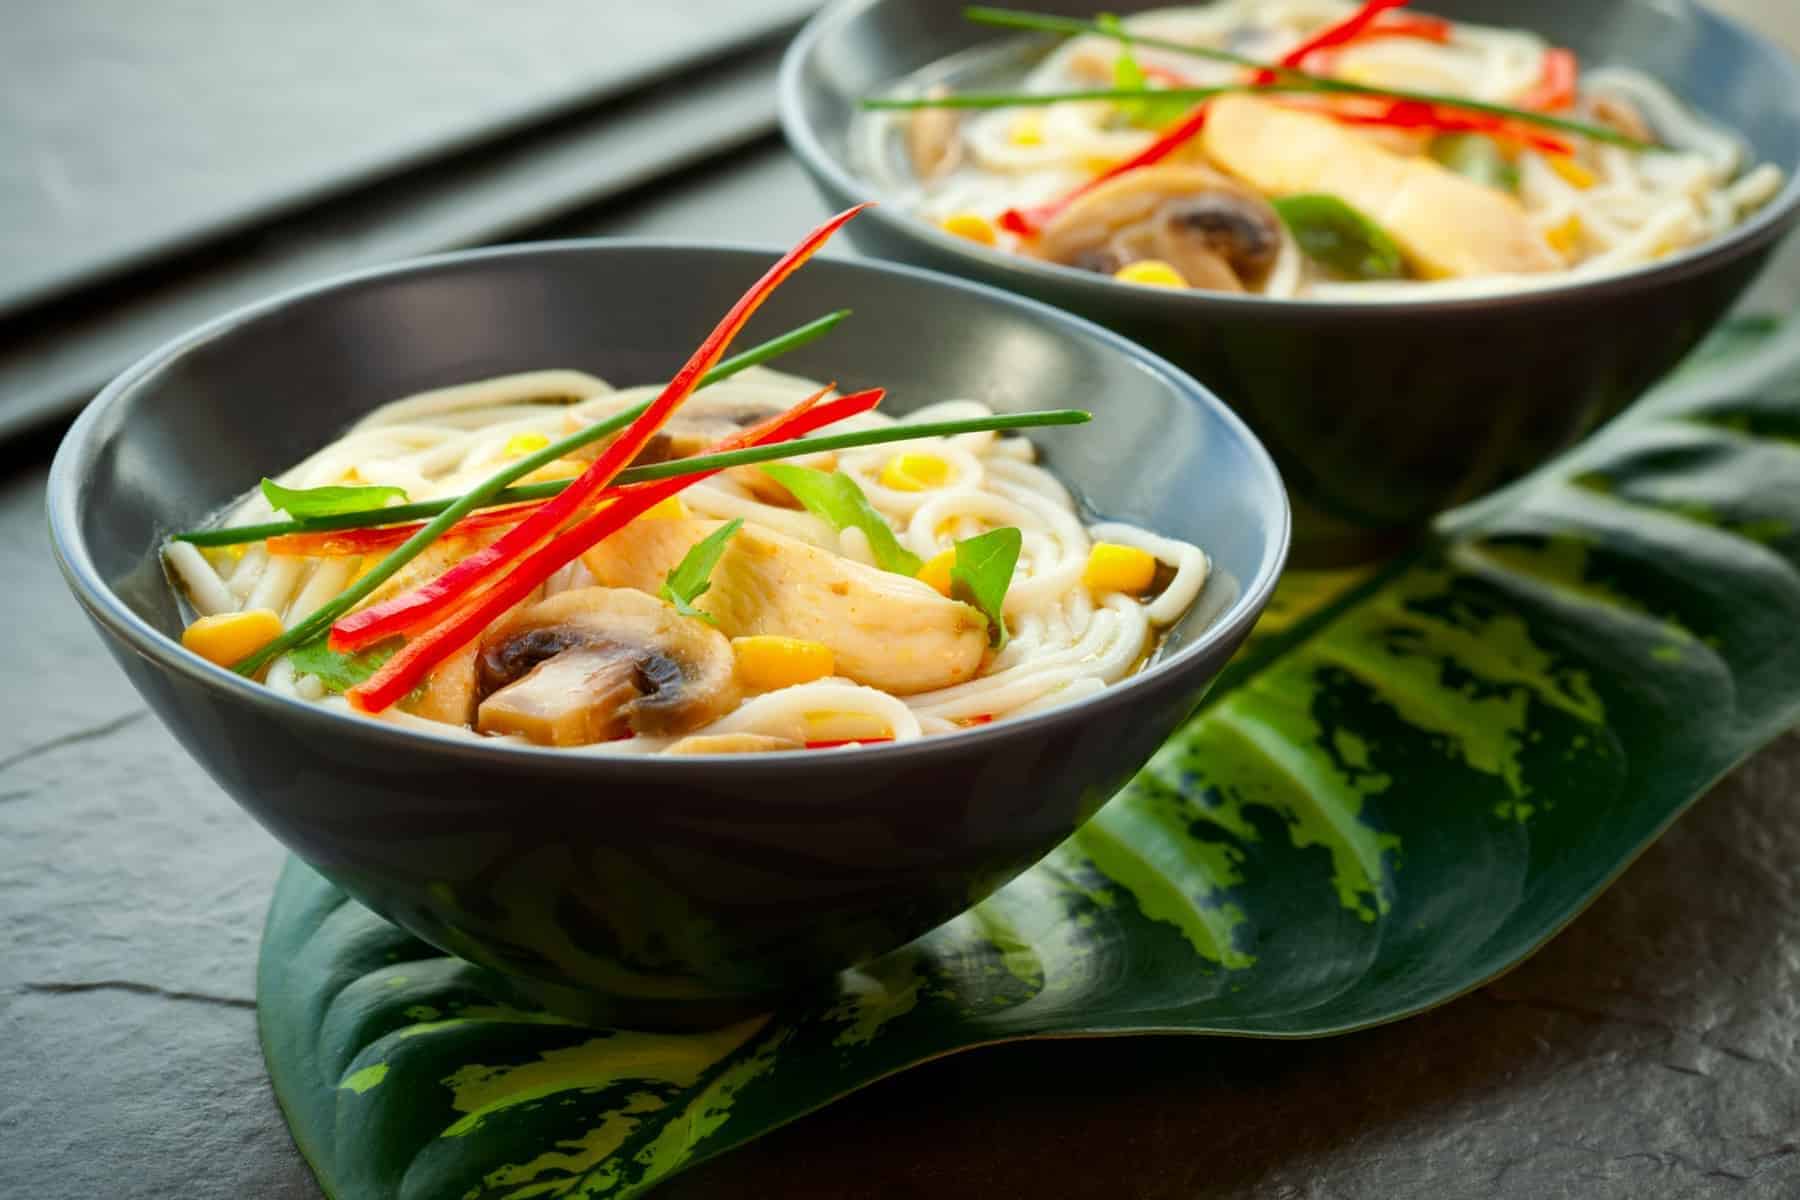 Bowls of Asian noodle soup with chicken,mushrooms, sweetcorn and chilli